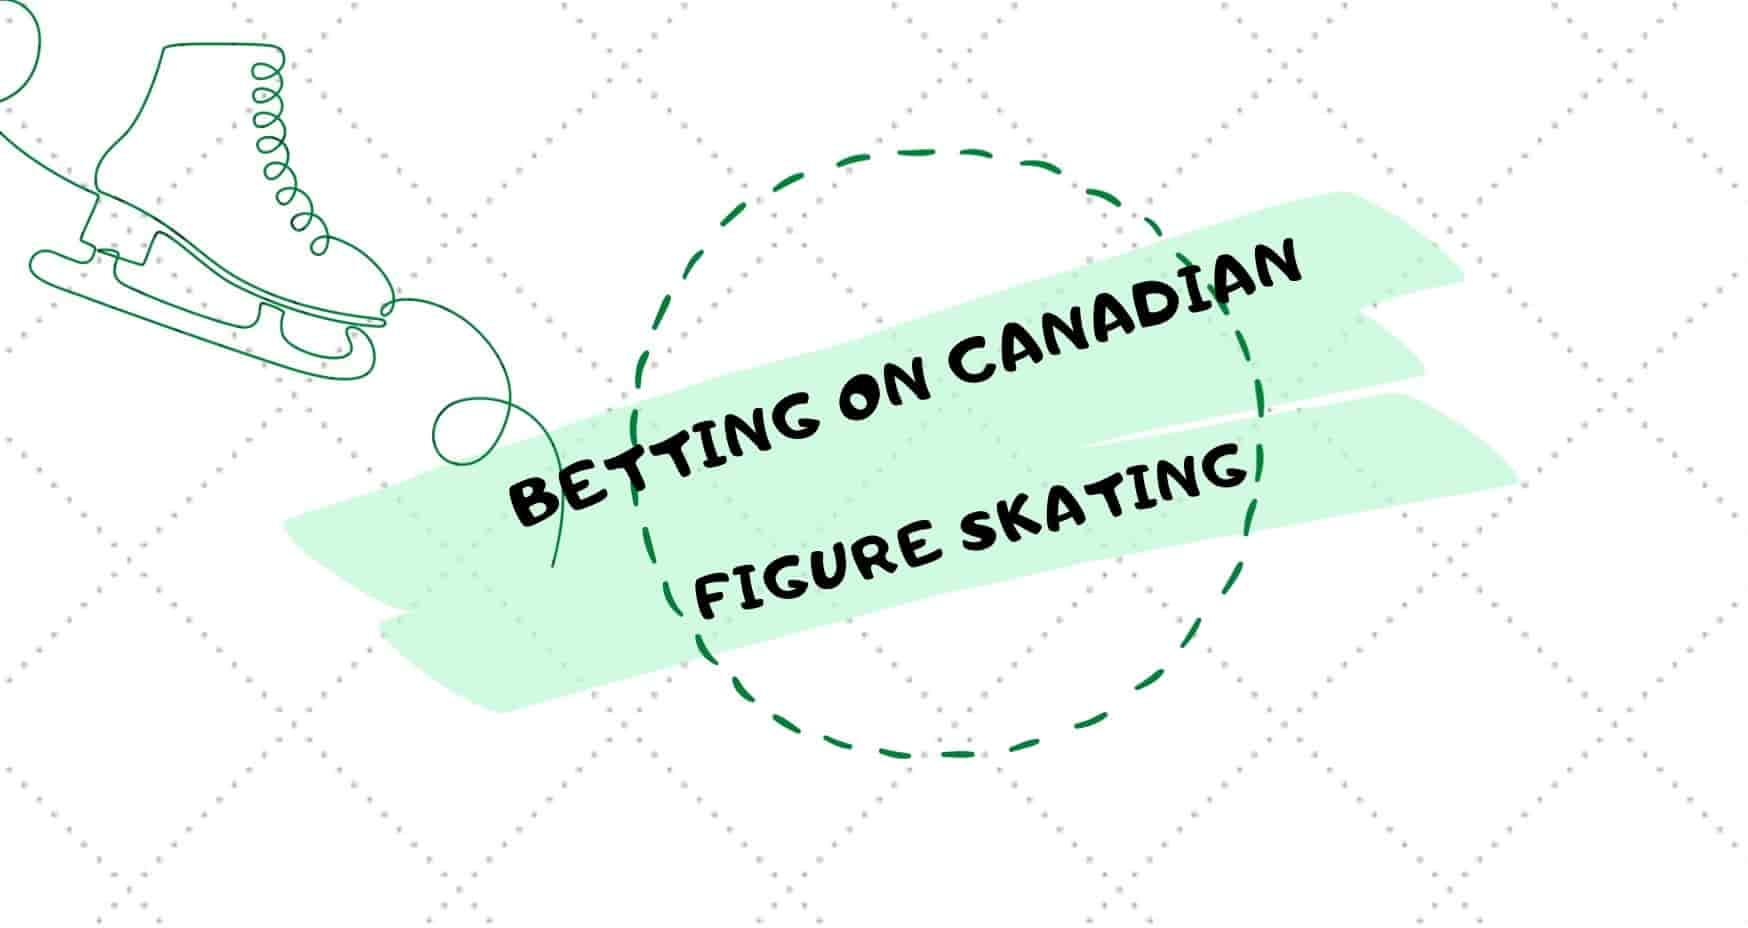 The Ice is Right: A Beginner’s Guide to Betting on Canadian Figure Skating